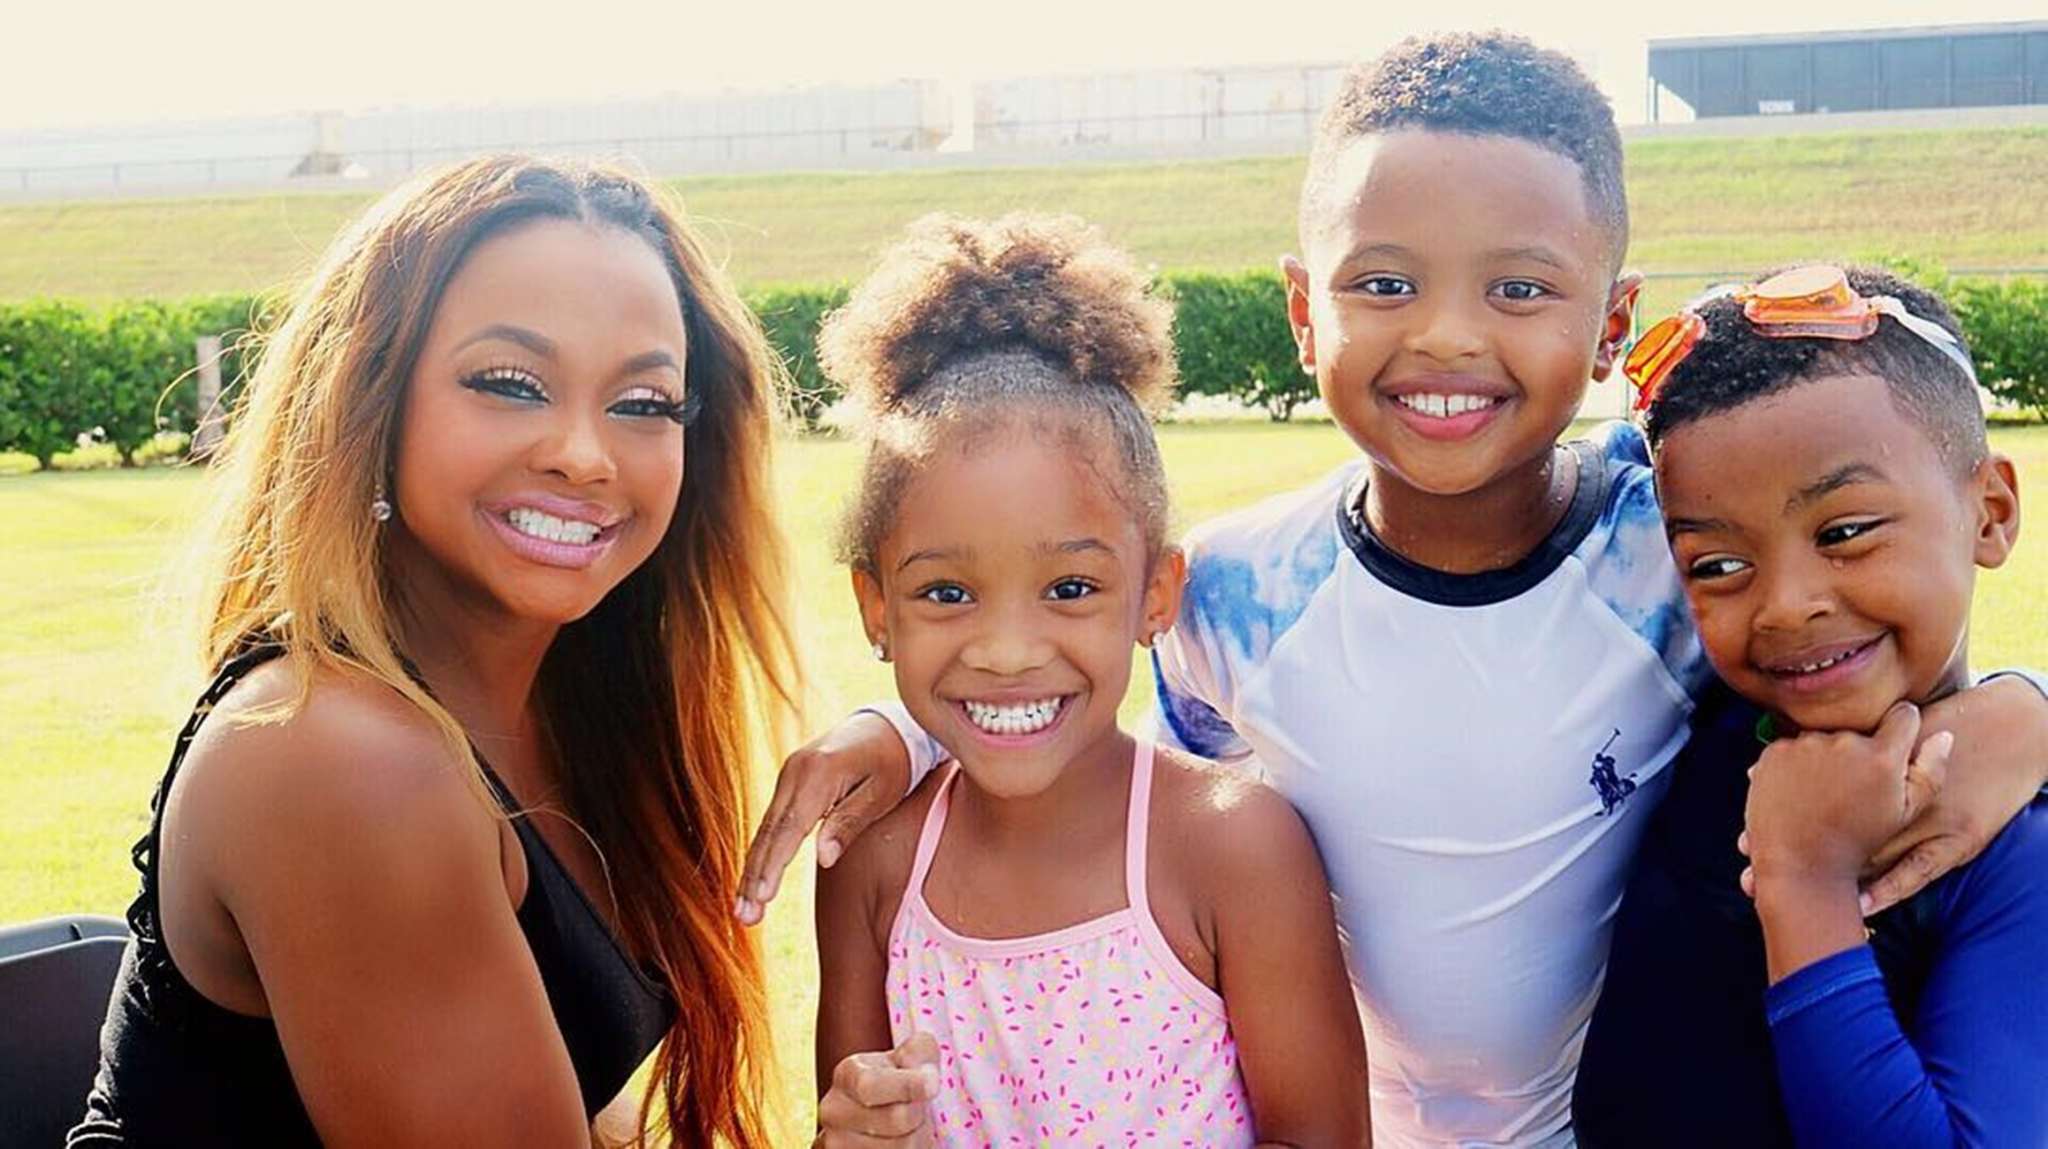 Phaedra Parks Shares Gorgeous Christmas Footage With Her Boys - See It Here